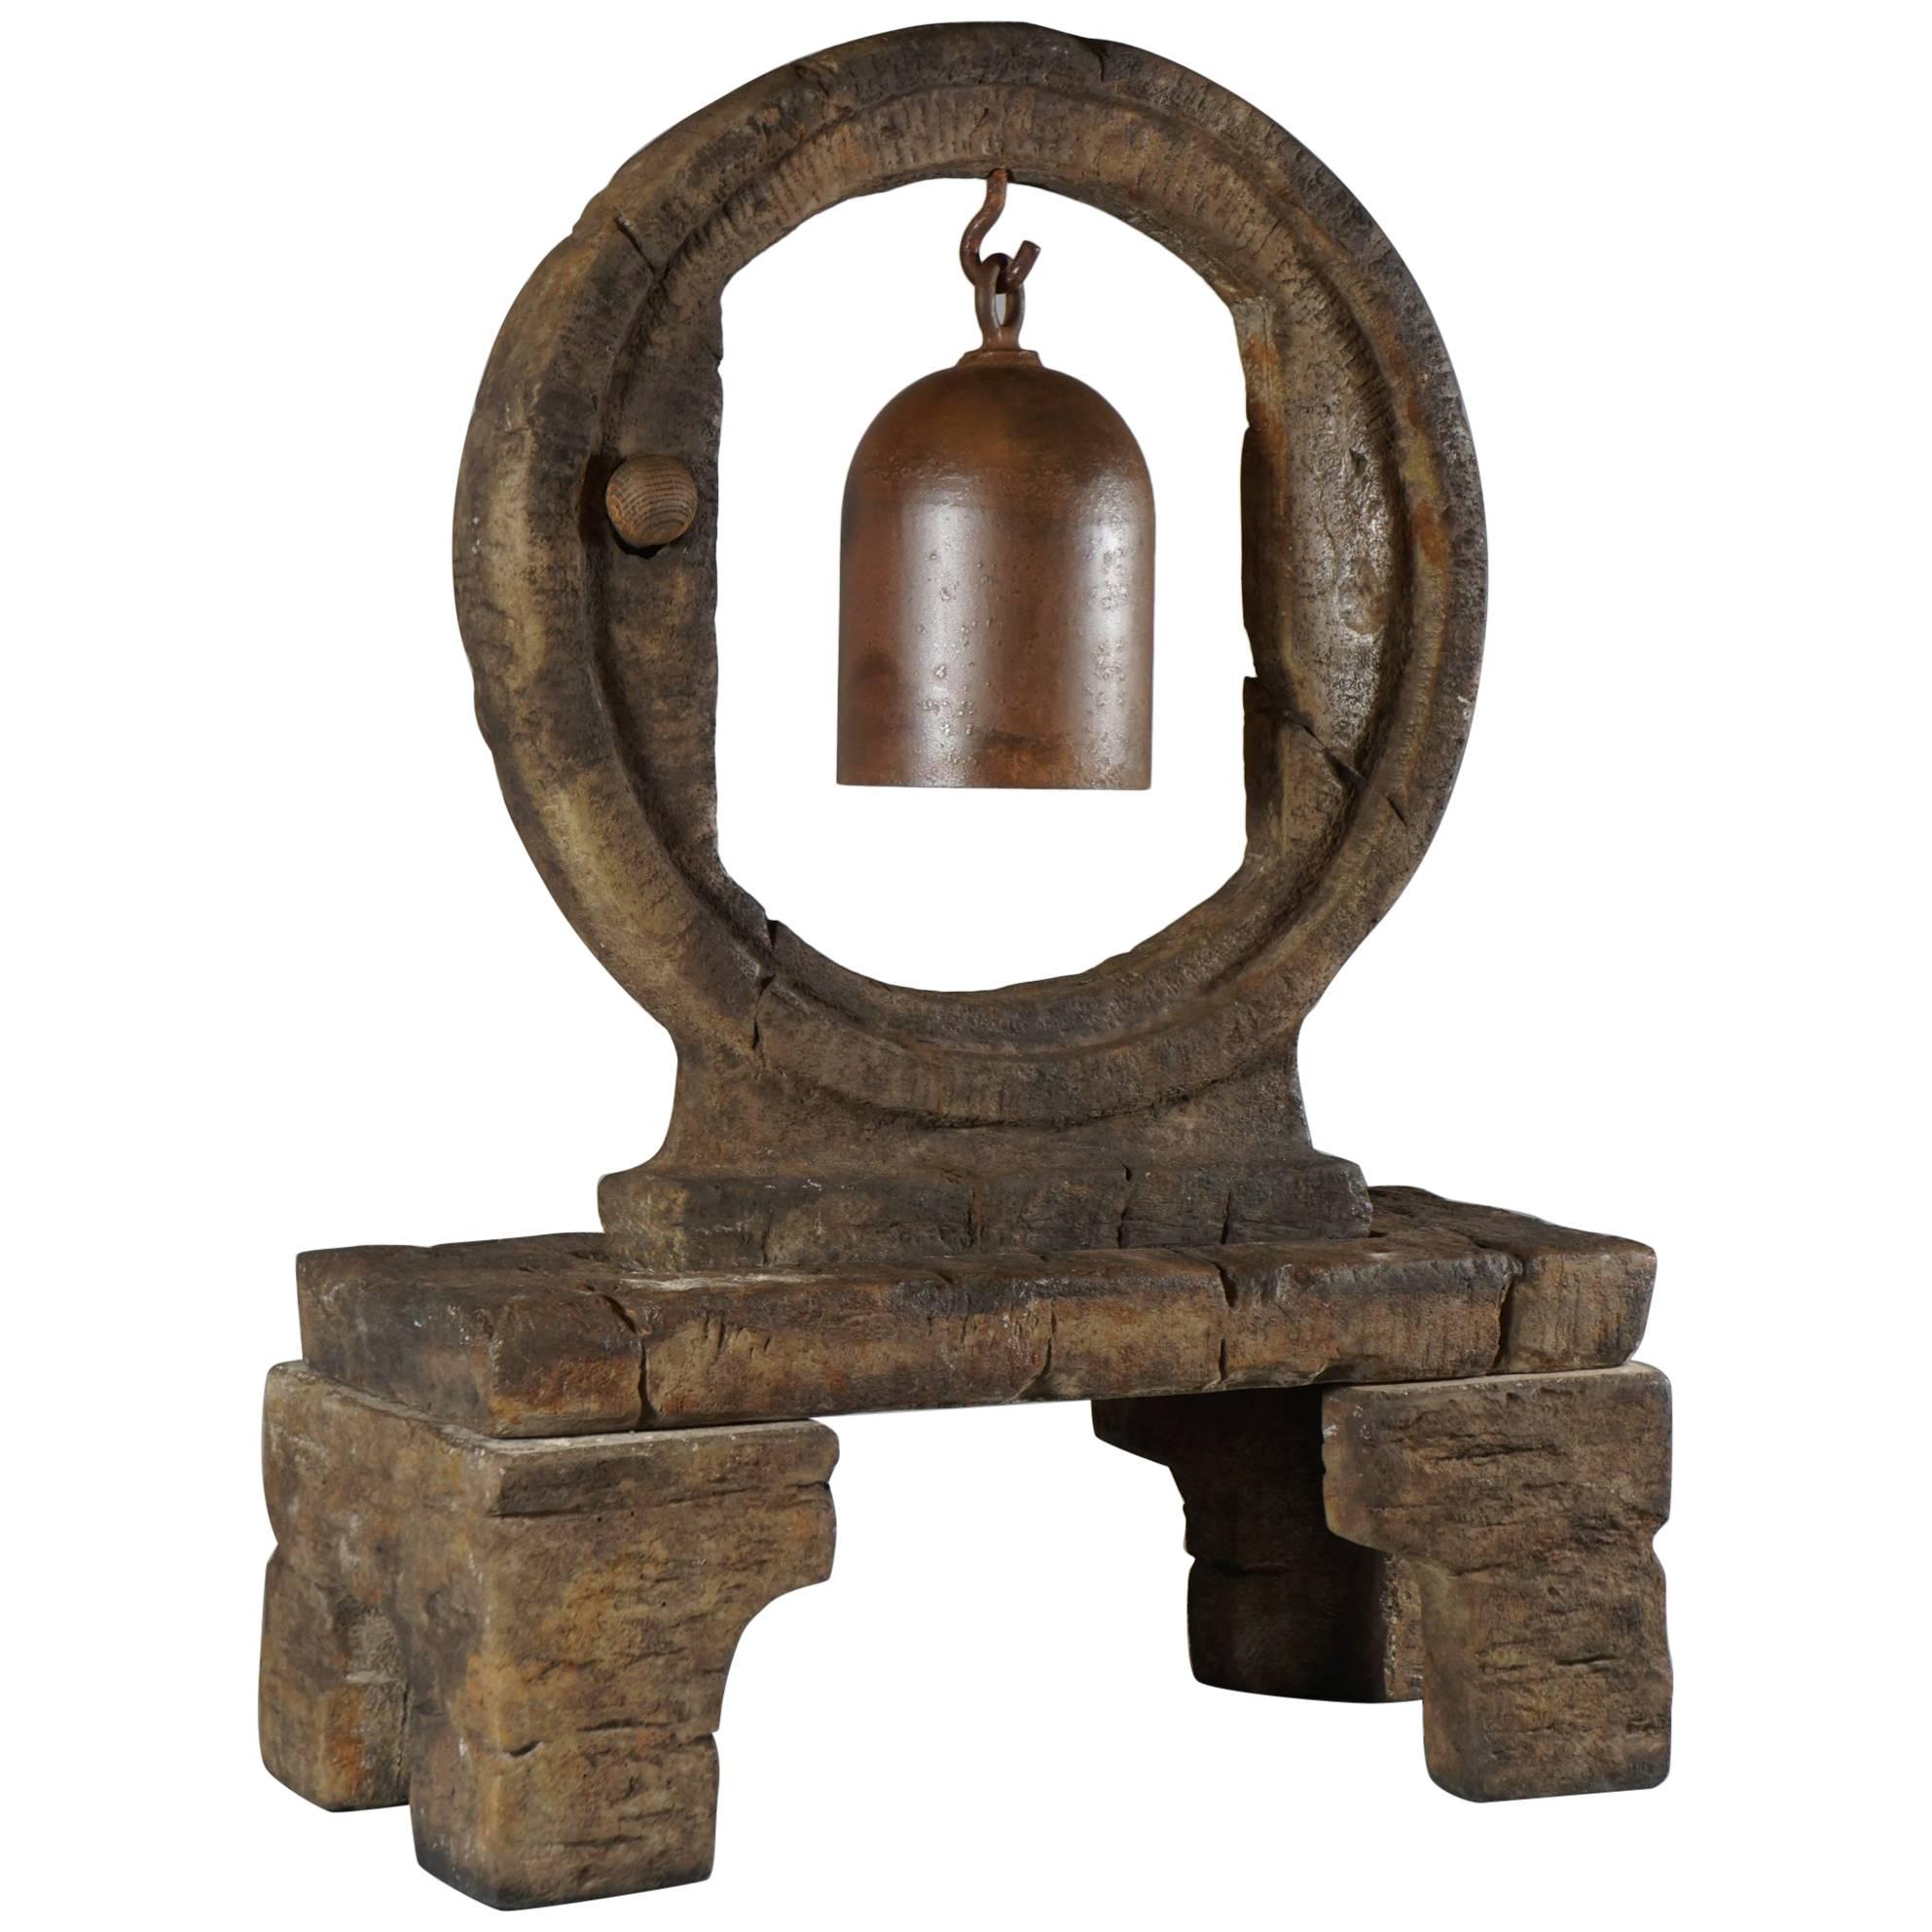 Resonant Iron Bell Suspended in Large Cast Stone Wheel on Stand